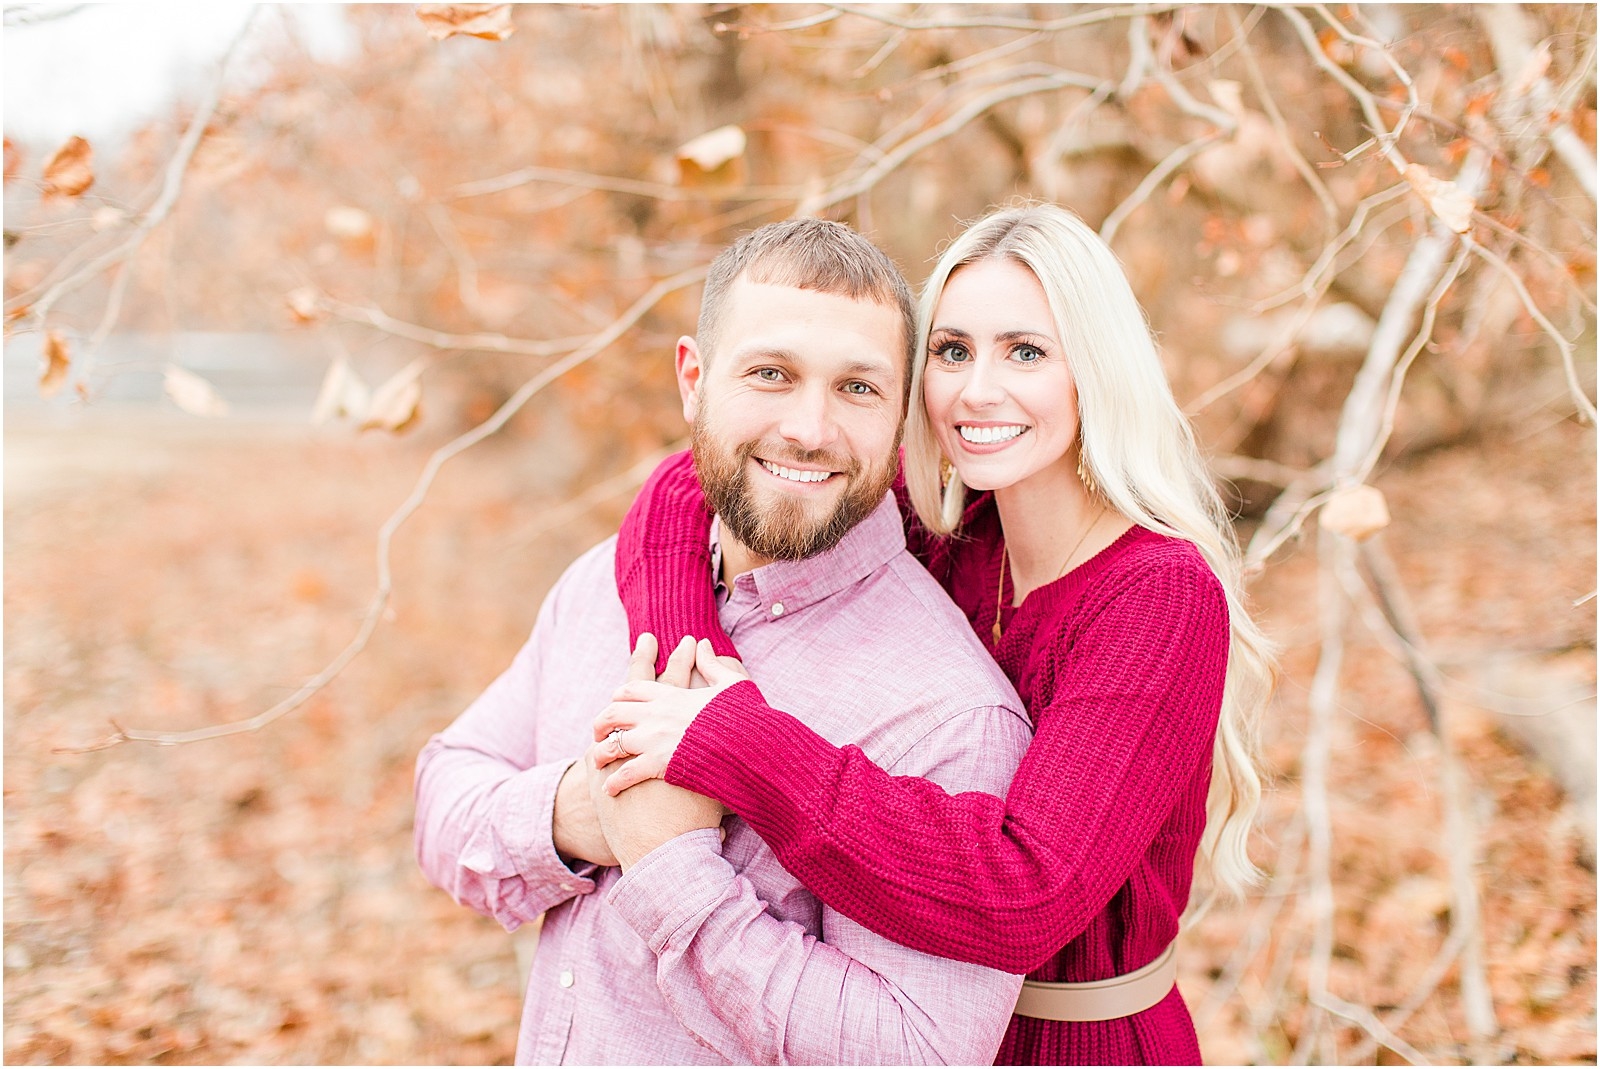 An sweet and snuggly fall anniversary session in Loogootee, Indiana. | #anniversarysession #fallsession #southernindianawedding | 015.jpg